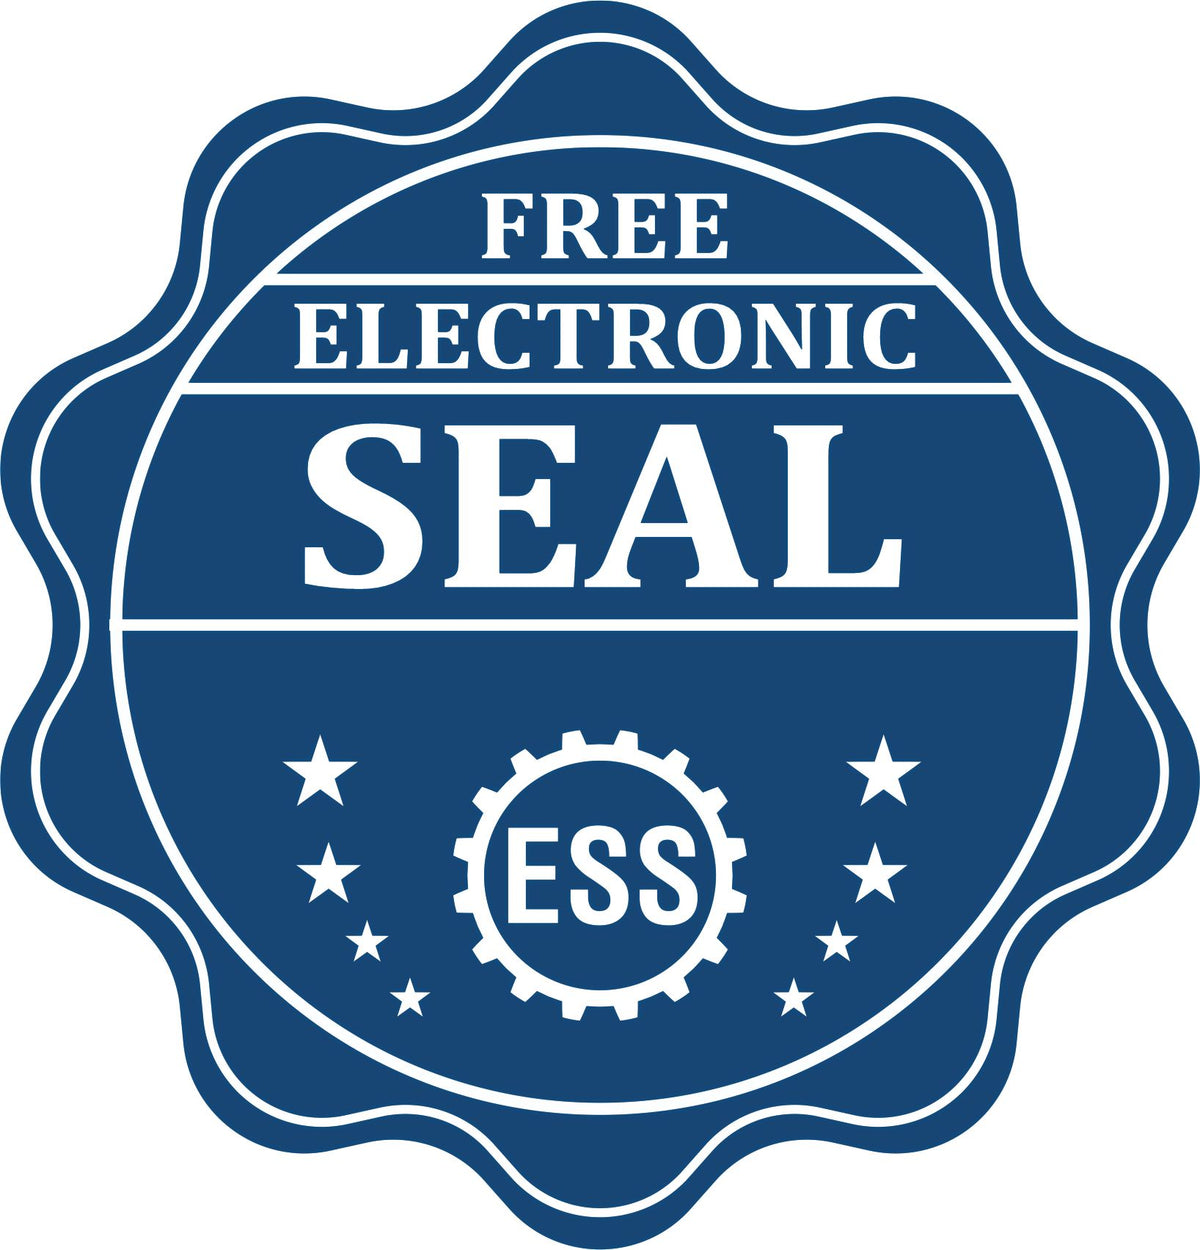 A badge showing a free electronic seal for the Long Reach Utah PE Seal with stars and the ESS gear on the emblem.